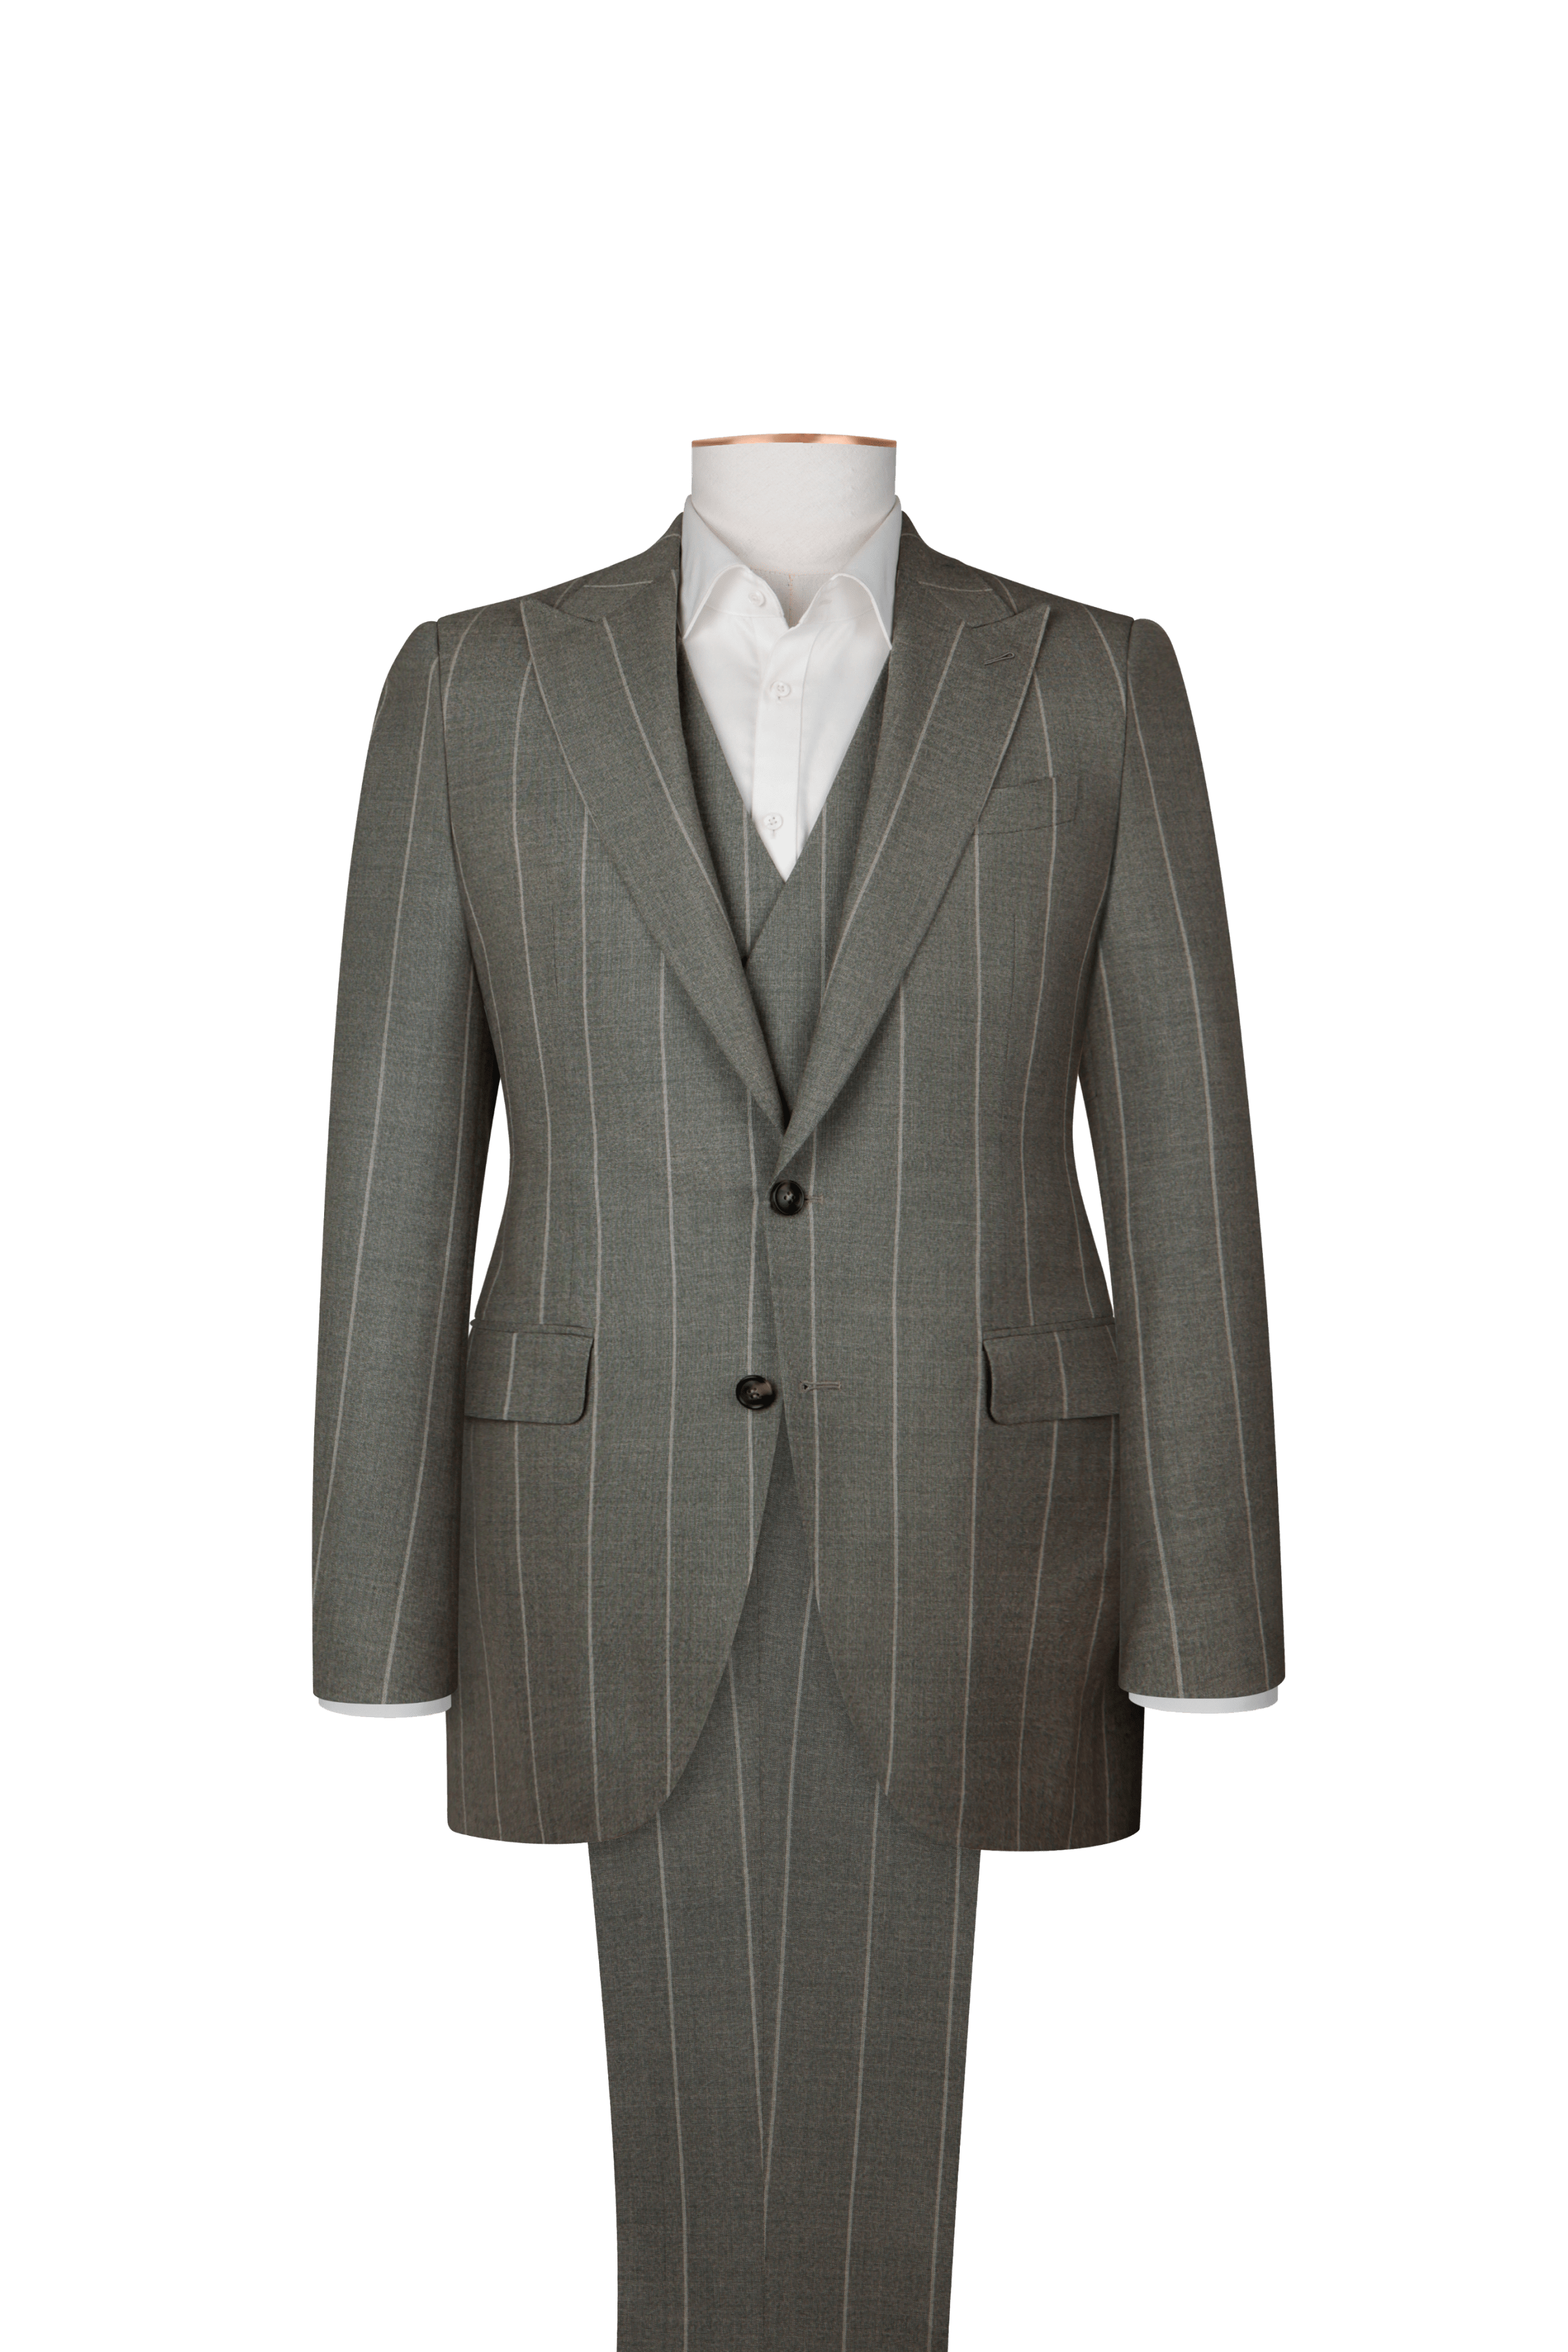 Dormeuil Green Pinstripe Suit by Knot Standard